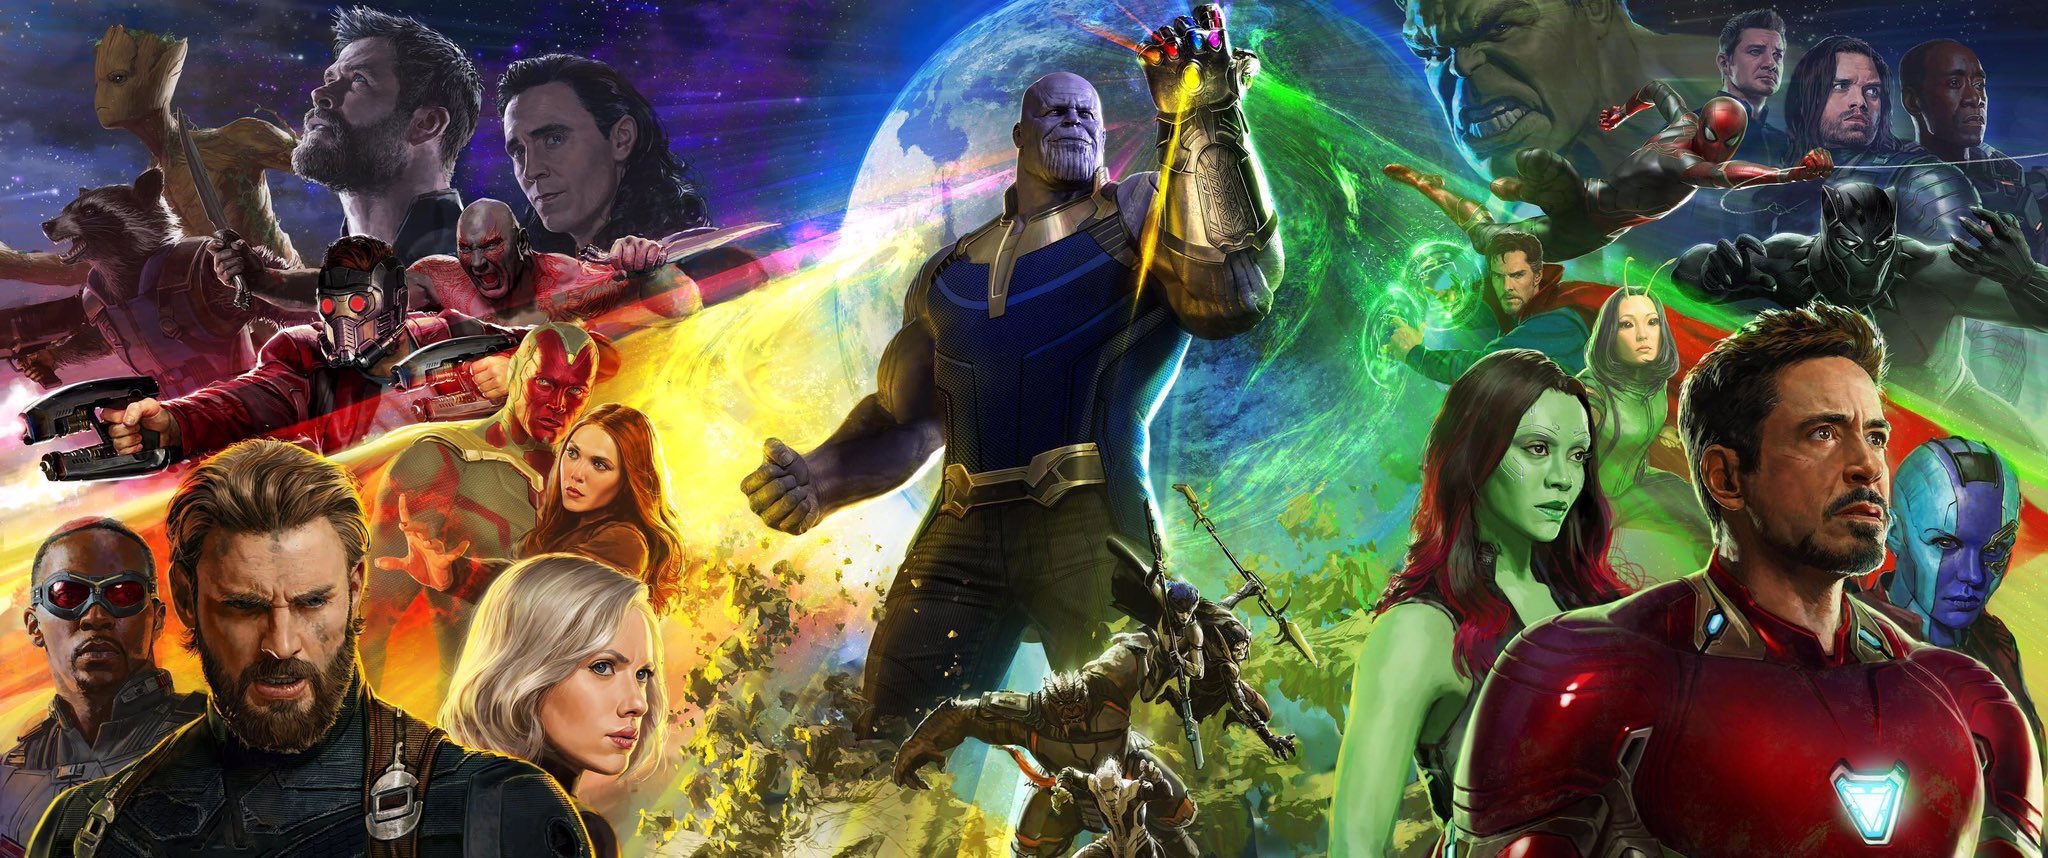 [Gallery Update] Official Thor: Ragnarok and Avengers: Infinity War Posters Released